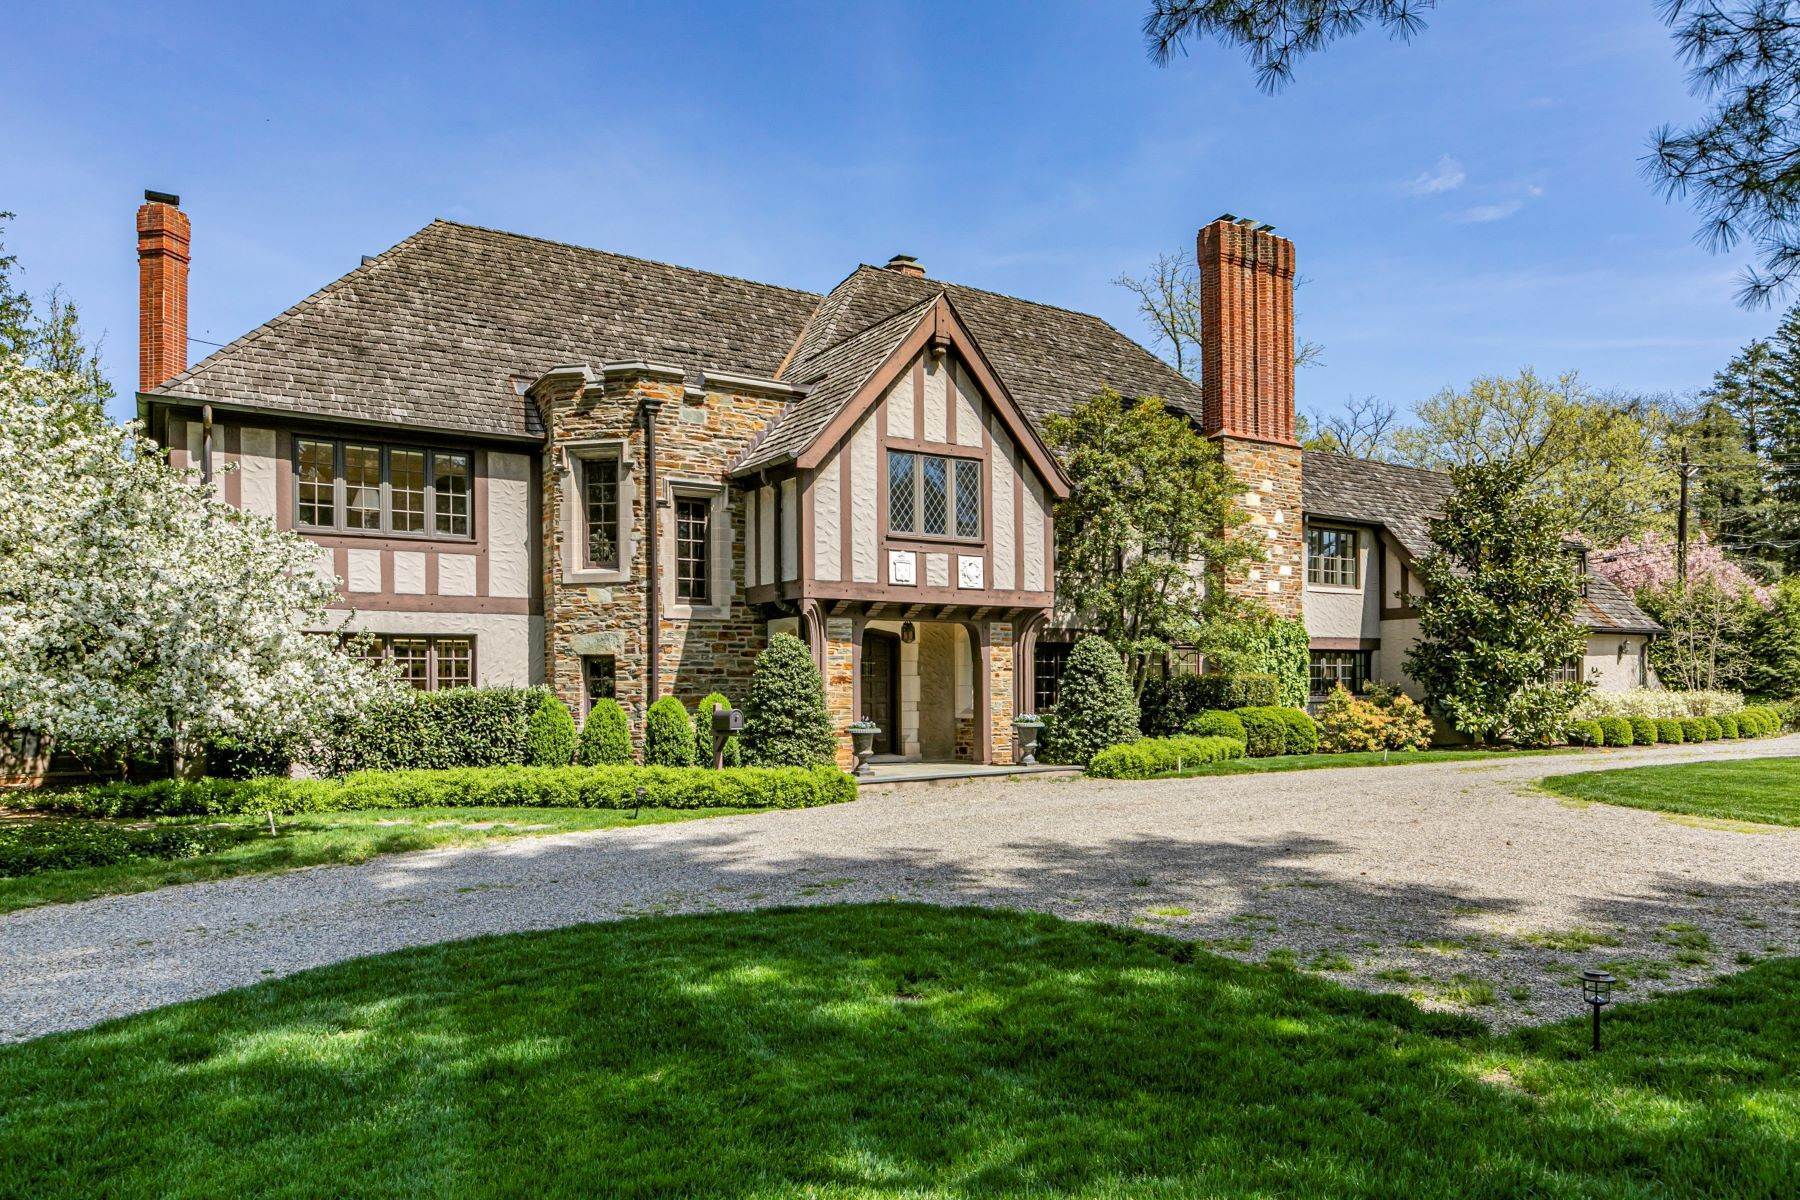 Property for Sale at Stunning Tudor in the Esteemed Western Section 193 Elm Road, Princeton, New Jersey 08540 United States